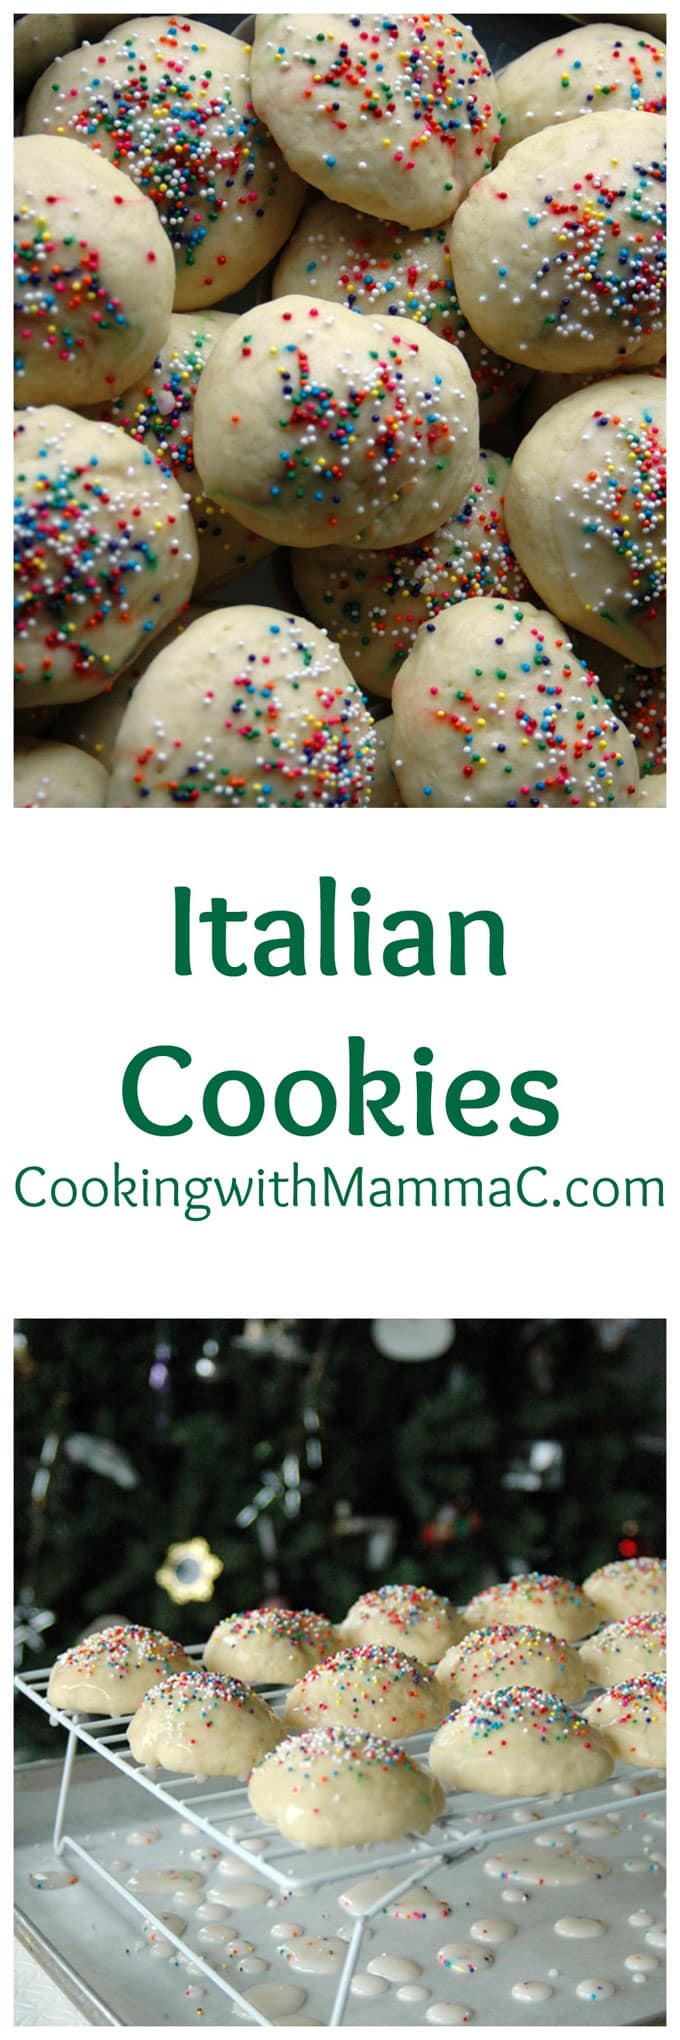 pinnable collage image of glazed cookies with sprinkles